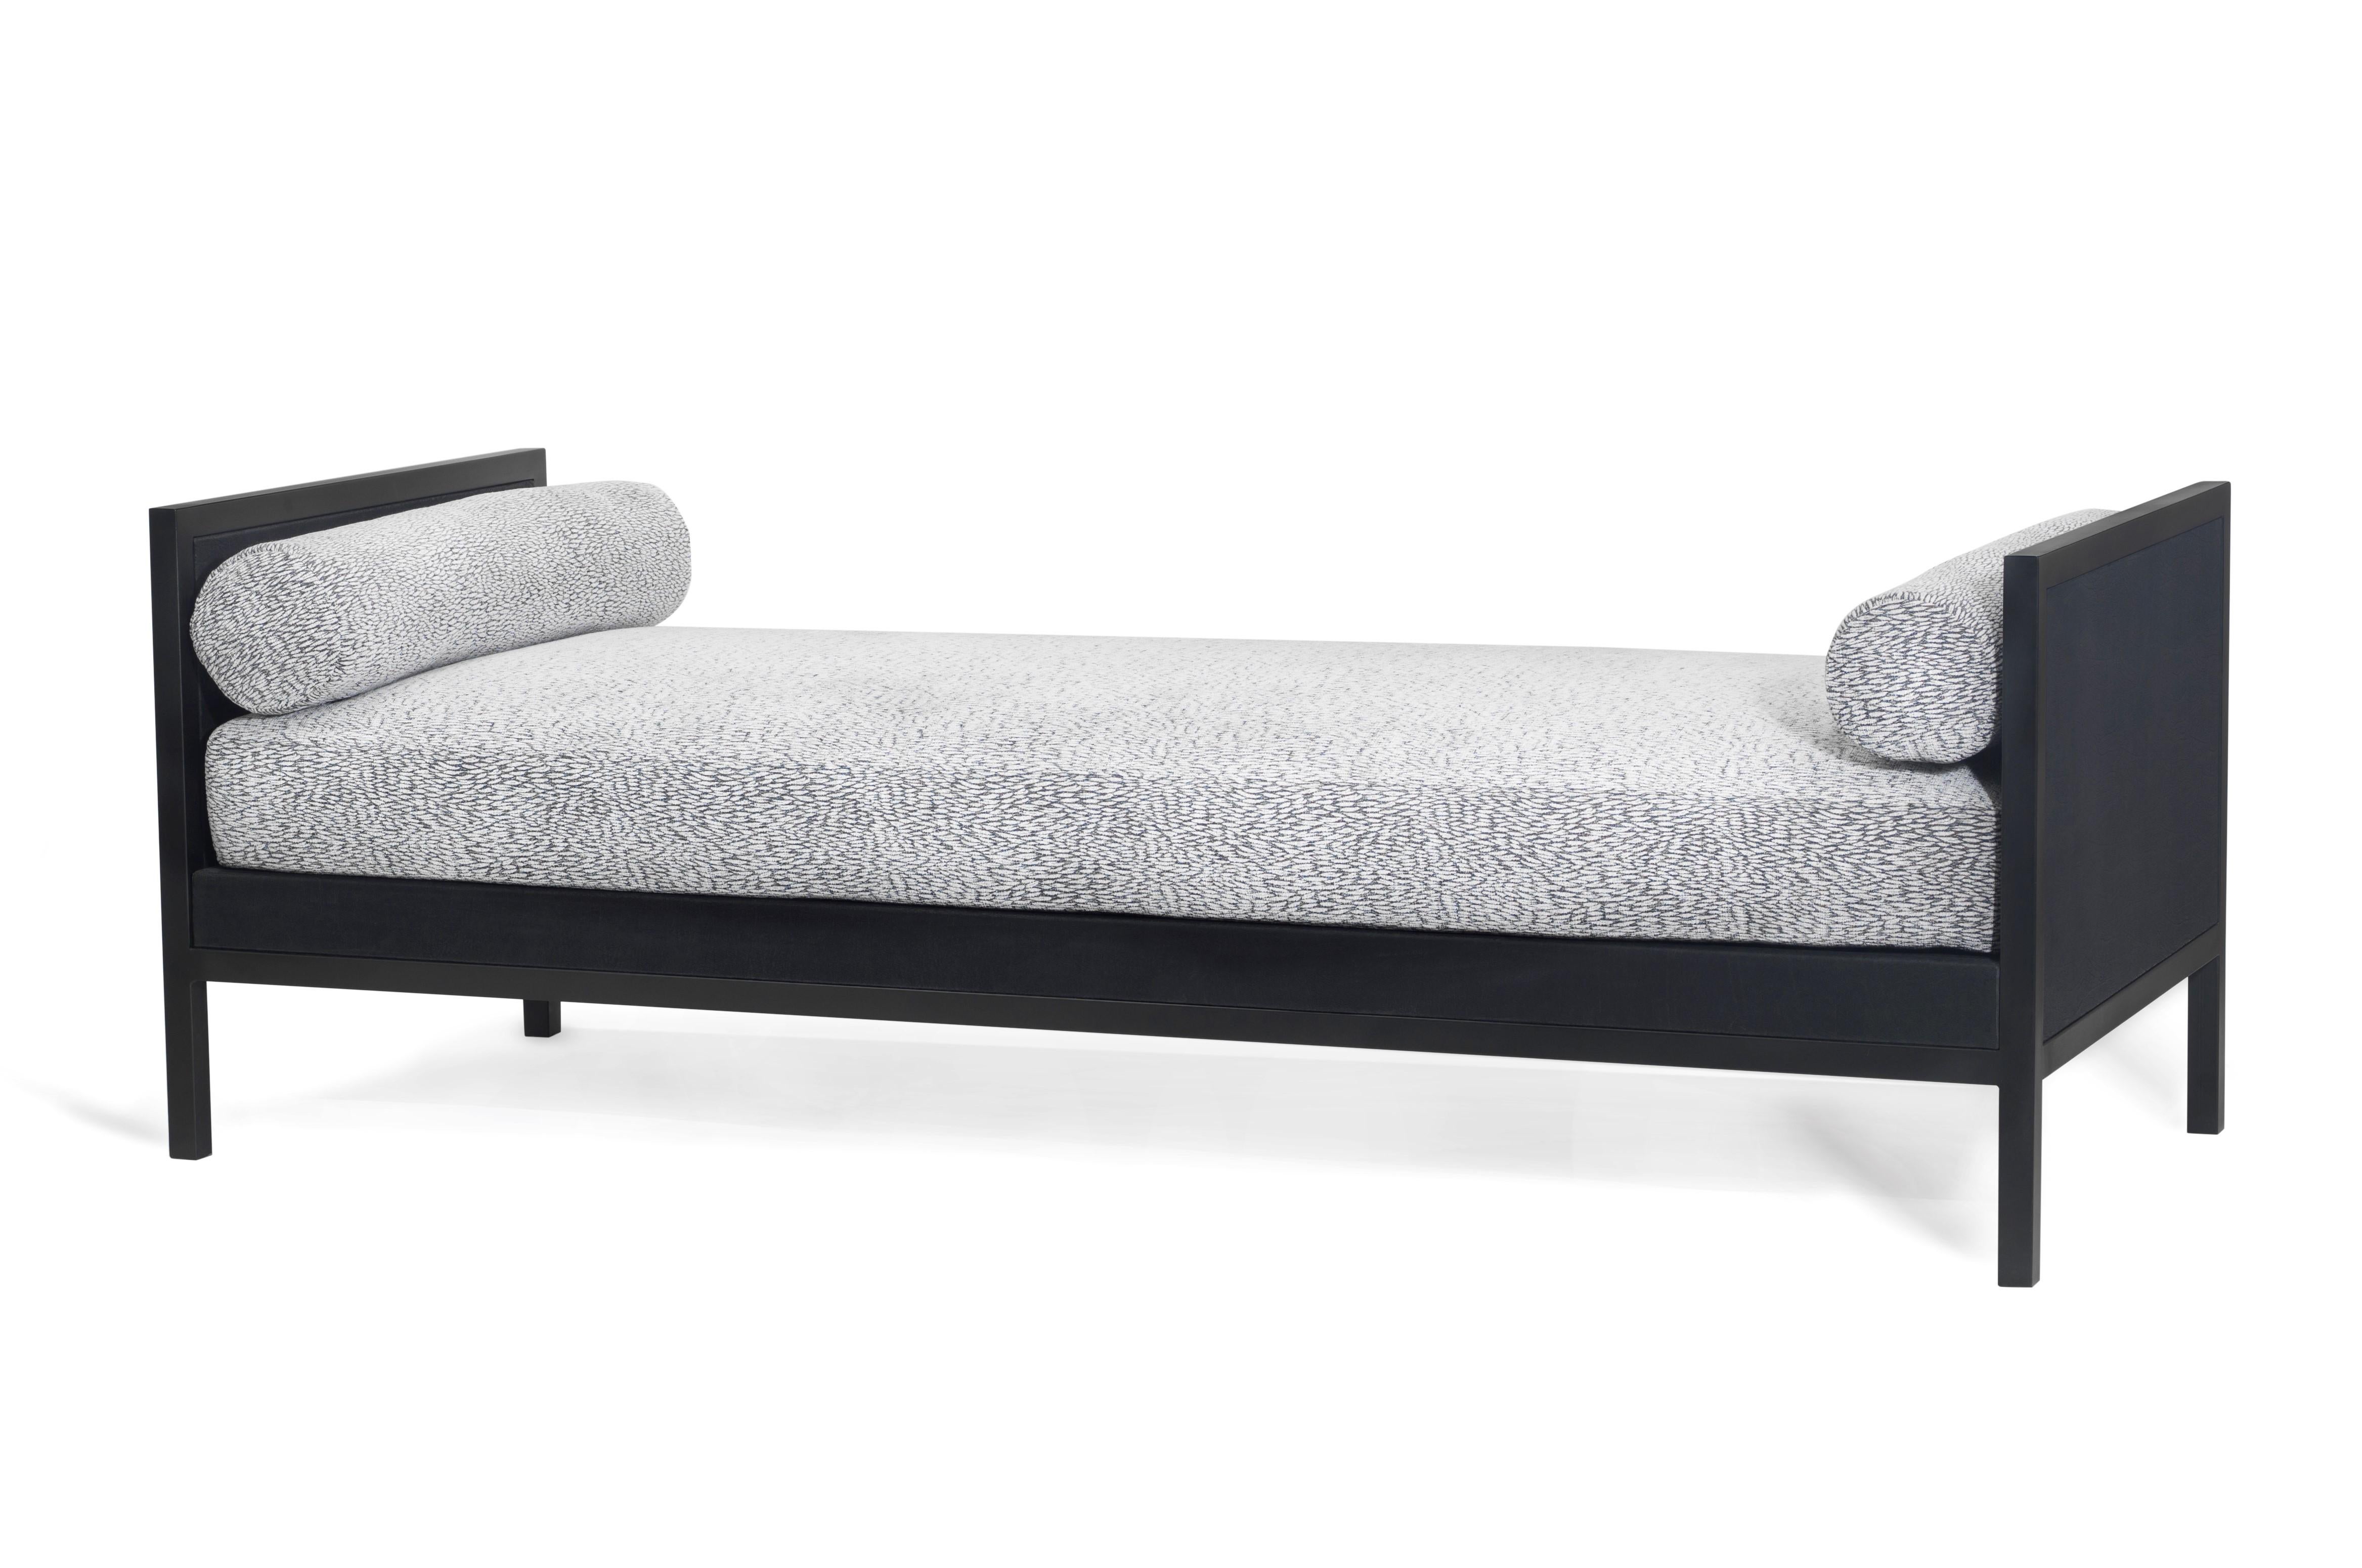 The Minimalist design of the All daybed emphasizes its comfort and simplicity. The mix of materials of its structure, available in black lacquered iron and black oak or in black lacquered iron and black embossed leather, is elevated by the use of